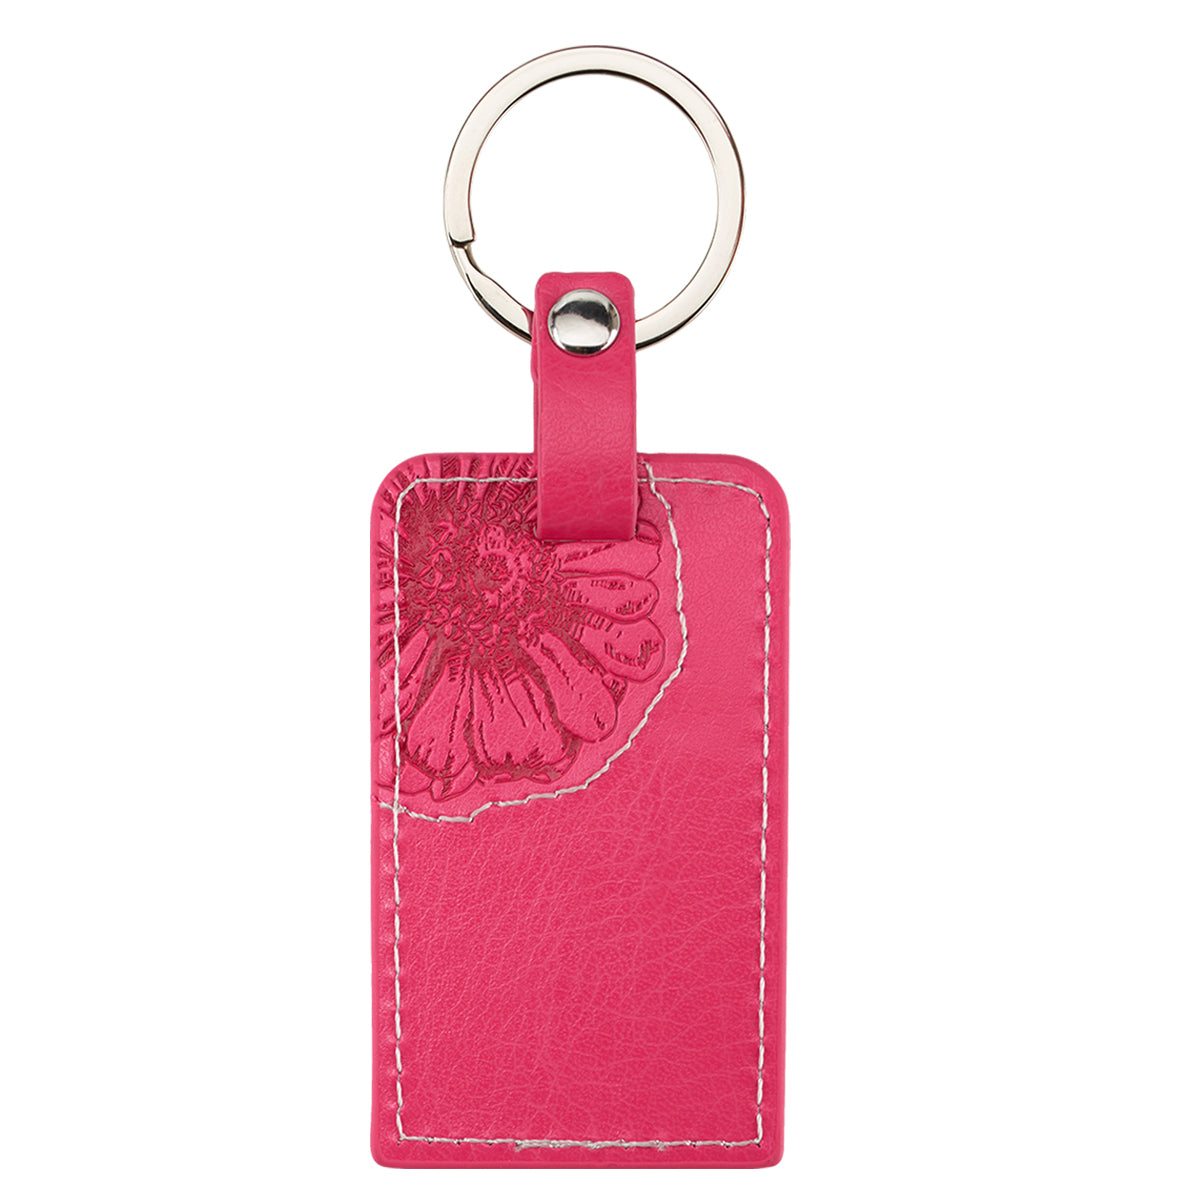 All Things are Possible Bright Pink Faux Leather Key Ring - Matthew 19:26 - The Christian Gift Company